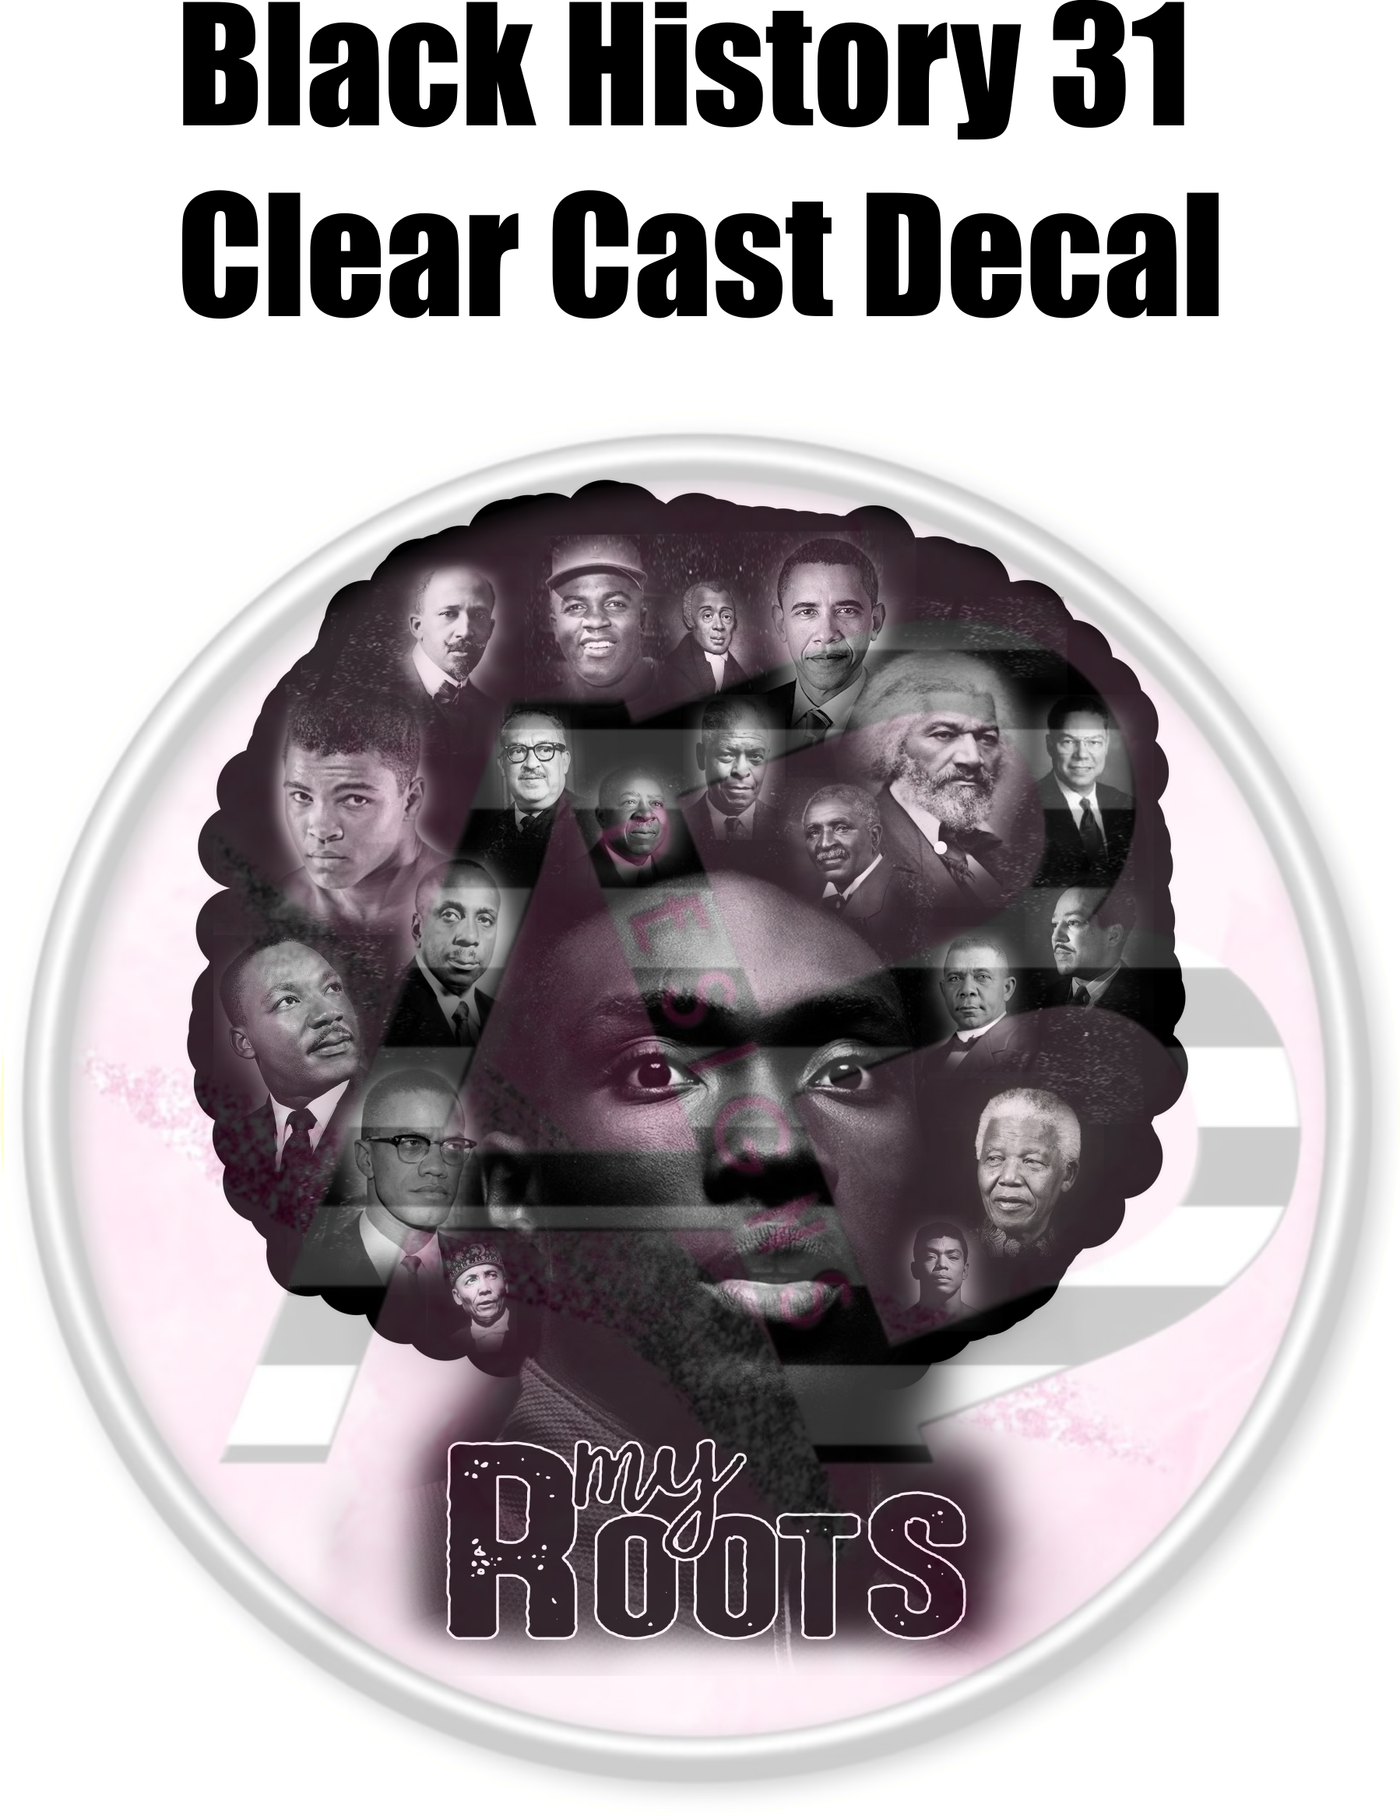 Black History 31 - Clear Cast Decal